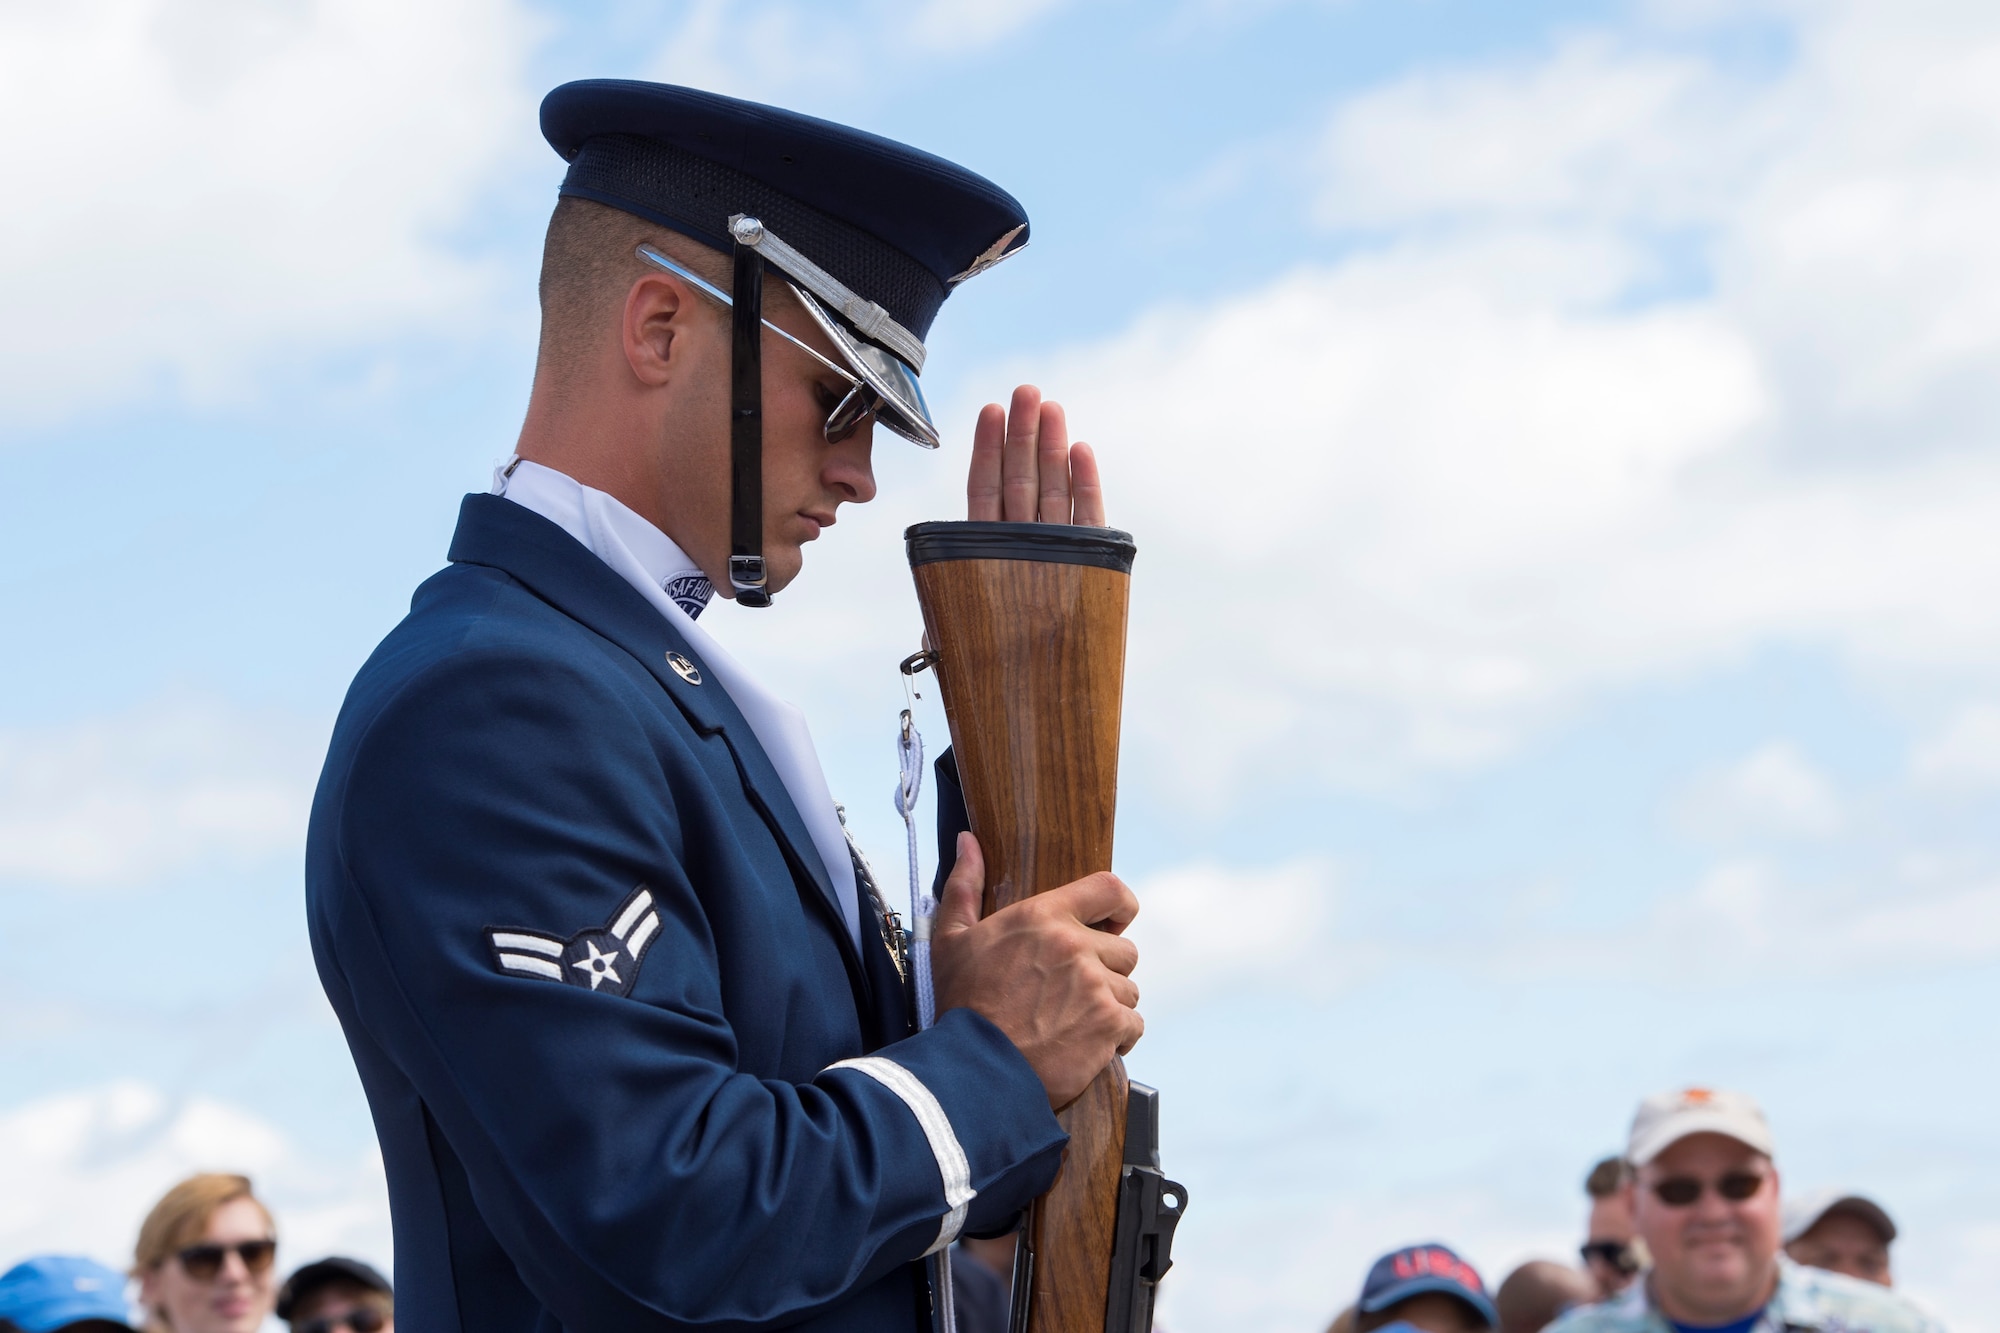 Airman 1st Class Tyler Reynolds, U.S. Air Force Honor Guard Drill Team member inspects the butt of his rifle during a four-man drill at the 58th Annual Chicago Air and Water Show on the shoreline of Lake Michigan in Chicago, Aug. 21, 2016. The show’s headliners were the USAF Thunderbirds, U.S. Army Golden Knights and the U.S. Navy Leap Frogs. (U.S. Air Force photo by Senior Airman Ryan J. Sonnier)